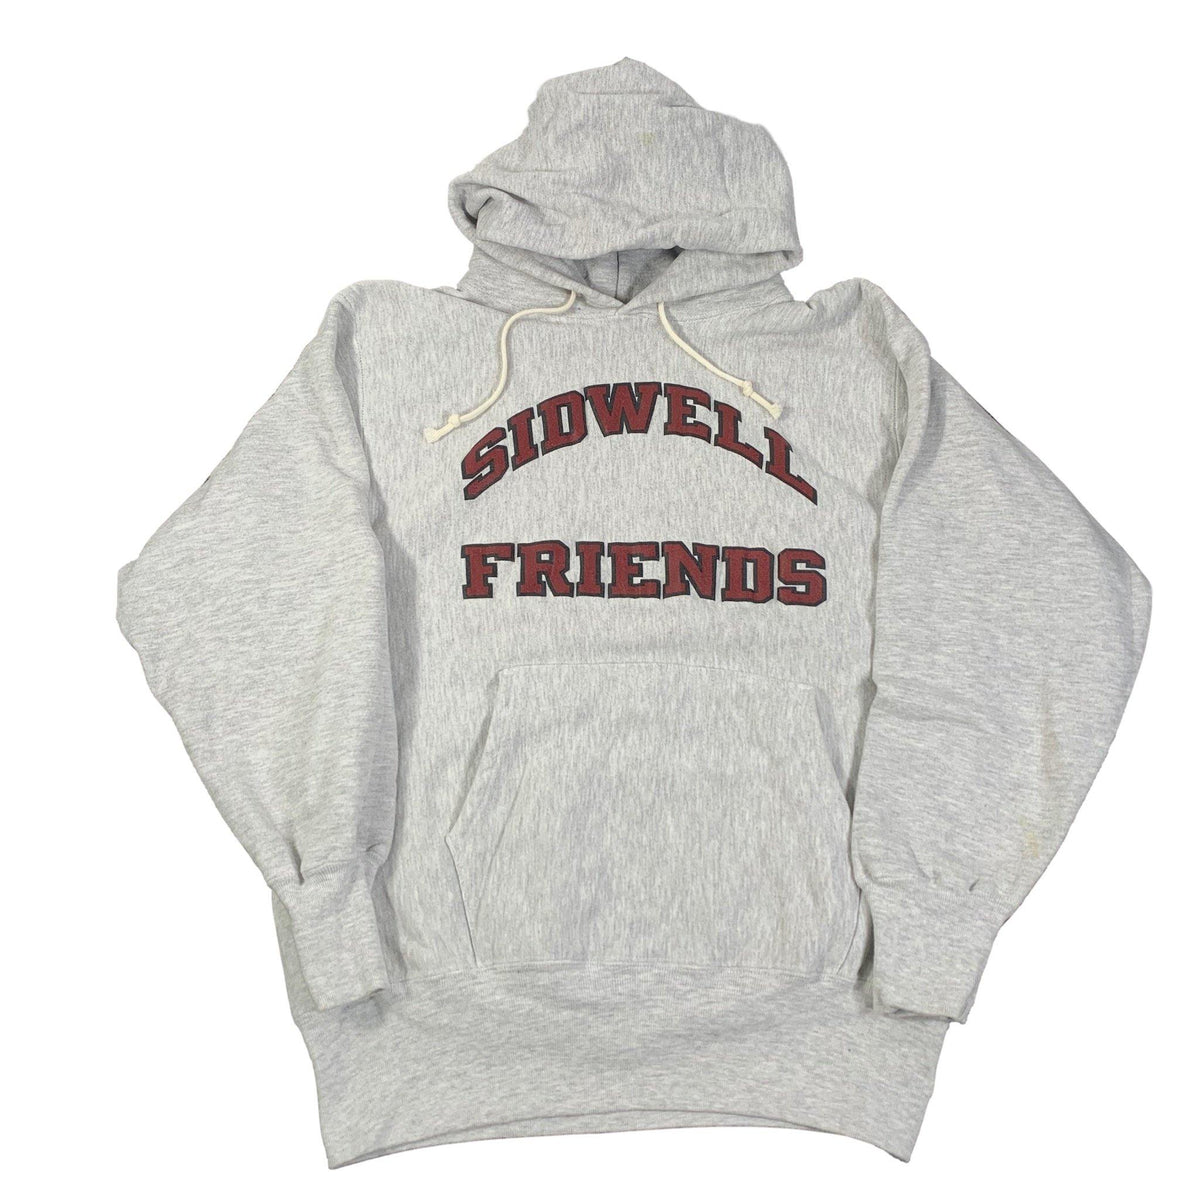 Vintage Champion Reverse Weave &quot;Sidwell Friends&quot; Pullover Hoodie - jointcustodydc